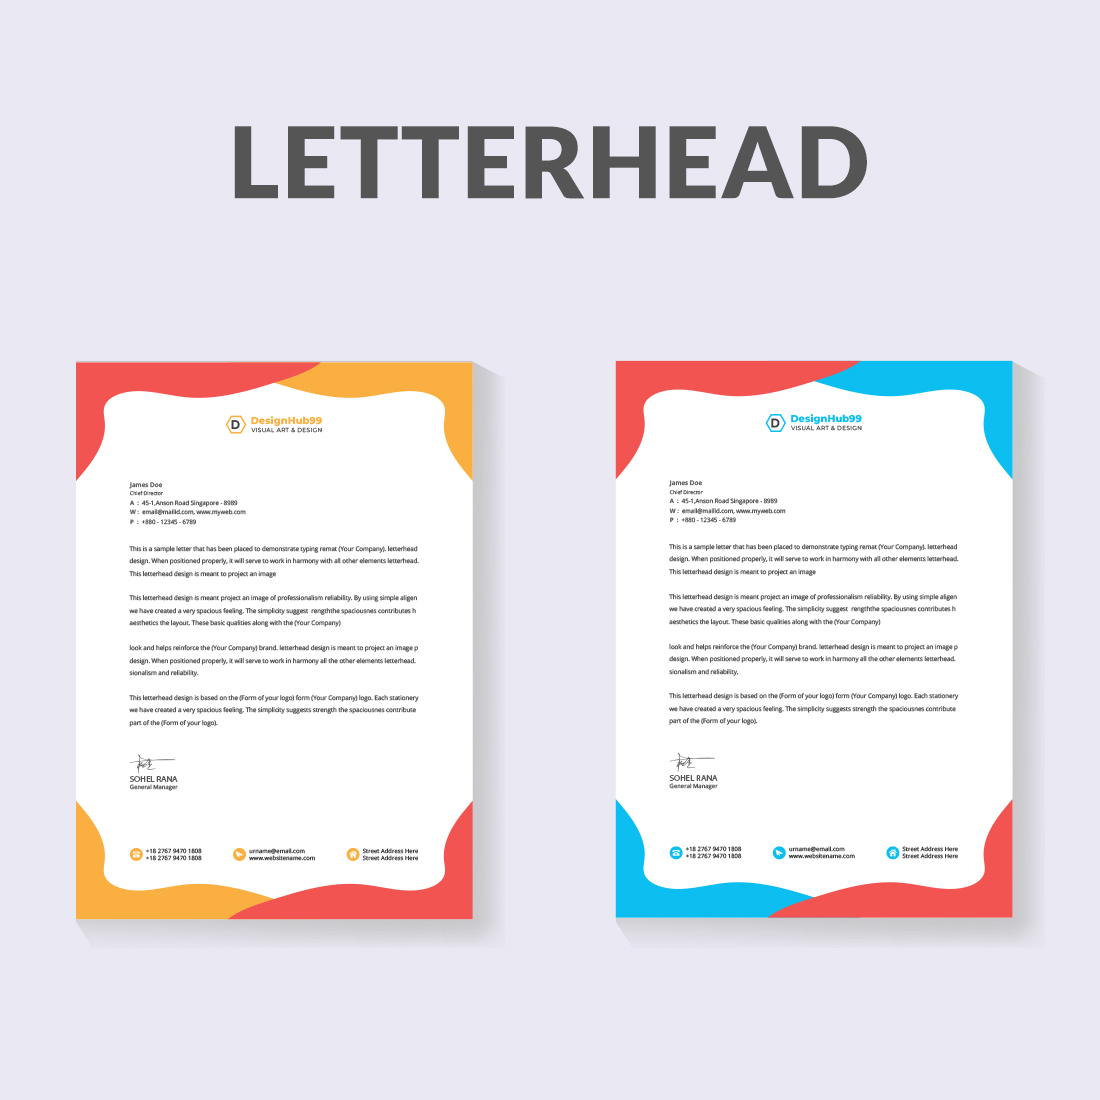 corporate business letterhead designYou will Get Features: -Editable Version -Used Free Commercial Font -Standard Quality Content -Print Ready Format -Template Size: A4 -High resolution 300 DPI -File: AI -Font: https://fontsgooglecom/specimen/Open+SansYou will Get Features: -Editable Version -Used Free Commercial Font -Standard Quality Content -Print Ready Format -Template Size: A4 -High resolution 300 DPI -File: AI -Font: https://fontsgooglecom/specimen/Open+SansYou will Get Features: -Editable Version -Used Free Commercial Font -Standard Quality Content -Print Ready Format -Template Size: A4 -High resolution 300 DPI -File: AI -Font: https://fontsgooglecom/specimen/Open+SansYou will Get Features: -Editable Version -Used Free Commercial Font -Standard Quality Content -Print Ready Format -Template Size: A4 -High resolution 300 DPI -File: AI -Font: https://fontsgooglecom/specimen/Open+SansYou will Get Features: -Editable Version -Used Free Commercial Font -Standard Quality Content -Print Ready Format -Template Size: A4 -High resolution 300 DPI -File: AI -Font: https://fontsgooglecom/specimen/Open+SansYou will Get Features: -Editable Version -Used Free Commercial Font -Standard Quality Content -Print Ready Format -Template Size: A4 -High resolution 300 DPI -File: AI -Font: https://fontsgooglecom/specimen/Open+SansYou will Get Features: -Editable Version -Used Free Commercial Font -Standard Quality Content -Print Ready Format -Template Size: A4 -High resolution 300 DPI -File: AI -Font: https://fontsgooglecom/specimen/Open+SansYou will Get Features: -Editable Version -Used Free Commercial Font -Standard Quality Content -Print Ready Format -Template Size: A4 -High resolution 300 DPI -File: AI -Font: https://fontsgooglecom/specimen/Open+SansYou will Get Features: -Editable Version -Used Free Commercial Font -Standard Quality Content -Print Ready Format -Template Size: A4 -High resolution 300 DPI -File: AI -Font: https://fontsgooglecom/specimen/Open+SansYou will Get Features: -Editable Version -Used Free Commercial Font -Standard Quality Content -Print Ready Format -Template Size: A4 -High resolution 300 DPI -File: AI -Font: https://fontsgooglecom/specimen/Open+SansYou will Get Features: -Editable Version -Used Free Commercial Font -Standard Quality Content -Print Ready Format -Template Size: A4 -High resolution 300 DPI -File: AI -Font: https://fontsgooglecom/specimen/Open+SansYou will Get Features: -Editable Version -Used Free Commercial Font -Standard Quality Content -Print Ready Format -Template Size: A4 -High resolution 300 DPI -File: AI -Font: https://fontsgooglecom/specimen/Open+SansYou will Get Features: -Editable Version -Used Free Commercial Font -Standard Quality Content -Print Ready Format -Template Size: A4 -High resolution 300 DPI -File: AI -Font: https://fontsgooglecom/specimen/Open+SansYou will Get Features: -Editable Version -Used Free Commercial Font -Standard Quality Content -Print Ready Format -Template Size: A4 -High resolution 300 DPI -File: AI -Font: https://fontsgooglecom/specimen/Open+SansYou will Get Features: -Editable Version -Used Free Commercial Font -Standard Quality Content -Print Ready Format -Template Size: A4 -High resolution 300 DPI -File: AI -Font: https://fontsgooglecom/specimen/Open+SansYou will Get Features: -Editable Version -Used Free Commercial Font -Standard Quality Content -Print Ready Format -Template Size: A4 -High resolution 300 DPI -File: AI -Font: https://fontsgooglecom/specimen/Open+SansYou will Get Features: -Editable Version -Used Free Commercial Font -Standard Quality Content -Print Ready Format -Template Size: A4 -High resolution 300 DPI -File: AI -Font: https://fontsgooglecom/specimen/Open+SansYou will Get Features: -Editable Version -Used Free Commercial Font -Standard Quality Content -Print Ready Format -Template Size: A4 -High resolution 300 DPI -File: AI -Font: https://fontsgooglecom/specimen/Open+SansYou will Get Features: -Editable Version -Used Free Commercial Font -Standard Quality Content -Print Ready Format -Template Size: A4 -High resolution 300 DPI -File: AI -Font: https://fontsgooglecom/specimen/Open+SansYou will Get Features: -Editable Version -Used Free Commercial Font -Standard Quality Content -Print Ready Format -Template Size: A4 -High resolution 300 DPI -File: AI -Font: https://fontsgooglecom/specimen/Open+SansYou will Get Features: -Editable Version -Used Free Commercial Font -Standard Quality Content -Print Ready Format -Template Size: A4 -High resolution 300 DPI -File: AI -Font: https://fontsgooglecom/specimen/Open+SansYou will Get Features: -Editable Version -Used Free Commercial Font -Standard Quality Content -Print Ready Format -Template Size: A4 -High resolution 300 DPI -File: AI -Font: https://fontsgooglecom/specimen/Open+SansYou will Get Features: -Editable Version -Used Free Commercial Font -Standard Quality Content -Print Ready Format -Template Size: A4 -High resolution 300 DPI -File: AI -Font: https://fontsgooglecom/specimen/Open+SansYou will Get Features: -Editable Version -Used Free Commercial Font -Standard Quality Content -Print Ready Format -Template Size: A4 -High resolution 300 DPI -File: AI -Font: https://fontsgooglecom/specimen/Open+SansYou will Get Features: -Editable Version -Used Free Commercial Font -Standard Quality Content -Print Ready Format -Template Size: A4 -High resolution 300 DPI -File: AI -Font: https://fontsgooglecom/specimen/Open+SansYou will Get Features: -Editable Version -Used Free Commercial Font -Standard Quality Content -Print Ready Format -Template Size: A4 -High resolution 300 DPI -File: AI -Font: https://fontsgooglecom/specimen/Open+SansYou will Get Features: -Editable Version -Used Free Commercial Font -Standard Quality Content -Print Ready Format -Template Size: A4 -High resolution 300 DPI -File: AI -Font: https://fontsgooglecom/specimen/Open+SansYou will Get Features: -Editable Version -Used Free Commercial Font -Standard Quality Content -Print Ready Format -Template Size: A4 -High resolution 300 DPI -File: AI -Font: https://fontsgooglecom/specimen/Open+SansYou will Get Features: -Editable Version -Used Free Commercial Font -Standard Quality Content -Print Ready Format -Template Size: A4 -High resolution 300 DPI -File: AI -Font: https://fontsgooglecom/specimen/Open+SansYou will Get Features: -Editable Version -Used Free Commercial Font -Standard Quality Content -Print Ready Format -Template Size: A4 -High resolution 300 DPI -File: AI -Font: https://fontsgooglecom/specimen/Open+SansYou will Get Features: -Editable Version -Used Free Commercial Font -Standard Quality Content -Print Ready Format -Template Size: A4 -High resolution 300 DPI -File: AI -Font: https://fontsgooglecom/specimen/Open+SansYou will Get Features: -Editable Version -Used Free Commercial Font -Standard Quality Content -Print Ready Format -Template Size: A4 -High resolution 300 DPI -File: AI -Font: https://fontsgooglecom/specimen/Open+SansYou will Get Features: -Editable Version -Used Free Commercial Font -Standard Quality Content -Print Ready Format -Template Size: A4 -High resolution 300 DPI -File: AI -Font: https://fontsgooglecom/specimen/Open+SansYou will Get Features: -Editable Version -Used Free Commercial Font -Standard Quality Content -Print Ready Format -Template Size: A4 -High resolution 300 DPI -File: AI -Font: https://fontsgooglecom/specimen/Open+SansYou will Get Features: -Editable Version -Used Free Commercial Font -Standard Quality Content -Print Ready Format -Template Size: A4 -High resolution 300 DPI -File: AI -Font: https://fontsgooglecom/specimen/Open+SansYou will Get Features: -Editable Version -Used Free Commercial Font -Standard Quality Content -Print Ready Format -Template Size: A4 -High resolution 300 DPI -File: AI -Font: https://fontsgooglecom/specimen/Open+SansYou will Get Features: -Editable Version -Used Free Commercial Font -Standard Quality Content -Print Ready Format -Template Size: A4 -High resolution 300 DPI -File: AI -Font: https://fontsgooglecom/specimen/Open+SansYou will Get Features: -Editable Version -Used Free Commercial Font -Standard Quality Content -Print Ready Format -Template Size: A4 -High resolution 300 DPI -File: AI -Font: https://fontsgooglecom/specimen/Open+SansYou will Get Features: -Editable Version -Used Free Commercial Font -Standard Quality Content -Print Ready Format -Template Size: A4 -High resolution 300 DPI -File: AI -Font: https://fontsgooglecom/specimen/Open+SansYou will Get Features: -Editable Version -Used Free Commercial Font -Standard Quality Content -Print Ready Format -Template Size: A4 -High resolution 300 DPI -File: AI -Font: https://fontsgooglecom/specimen/Open+SansYou will Get Features: -Editable Version -Used Free Commercial Font -Standard Quality Content -Print Ready Format -Template Size: A4 -High resolution 300 DPI -File: AI -Font: https://fontsgooglecom/specimen/Open+SansYou will Get Features: -Editable Version -Used Free Commercial Font -Standard Quality Content -Print Ready Format -Template Size: A4 -High resolution 300 DPI -File: AI -Font: https://fontsgooglecom/specimen/Open+SansYou will Get Features: -Editable Version -Used Free Commercial Font -Standard Quality Content -Print Ready Format -Template Size: A4 -High resolution 300 DPI -File: AI -Font: https://fontsgooglecom/specimen/Open+SansYou will Get Features: -Editable Version -Used Free Commercial Font -Standard Quality Content -Print Ready Format -Template Size: A4 -High resolution 300 DPI -File: AI -Font: https://fontsgooglecom/specimen/Open+SansYou will Get Features: -Editable Version -Used Free Commercial Font -Standard Quality Content -Print Ready Format -Template Size: A4 -High resolution 300 DPI -File: AI -Font: https://fontsgooglecom/specimen/Open+SansYou will Get Features: -Editable Version -Used Free Commercial Font -Standard Quality Content -Print Ready Format -Template Size: A4 -High resolution 300 DPI -File: AI -Font: https://fontsgooglecom/specimen/Open+SansYou will Get Features: -Editable Version -Used Free Commercial Font -Standard Quality Content -Print Ready Format -Template Size: A4 -High resolution 300 DPI -File: AI -Font: https://fontsgooglecom/specimen/Open+SansYou will Get Features: -Editable Version -Used Free Commercial Font -Standard Quality Content -Print Ready Format -Template Size: A4 -High resolution 300 DPI -File: AI -Font: https://fontsgooglecom/specimen/Open+SansYou will Get Features: -Editable Version -Used Free Commercial Font -Standard Quality Content -Print Ready Format -Template Size: A4 -High resolution 300 DPI -File: AI -Font: https://fontsgooglecom/specimen/Open+SansYou will Get Features: -Editable Version -Used Free Commercial Font -Standard Quality Content -Print Ready Format -Template Size: A4 -High resolution 300 DPI -File: AI -Font: https://fontsgooglecom/specimen/Open+SansYou will Get Features: -Editable Version -Used Free Commercial Font -Standard Quality Content -Print Ready Format -Template Size: A4 -High resolution 300 DPI -File: AI -Font: https://fontsgooglecom/specimen/Open+Sans preview image.